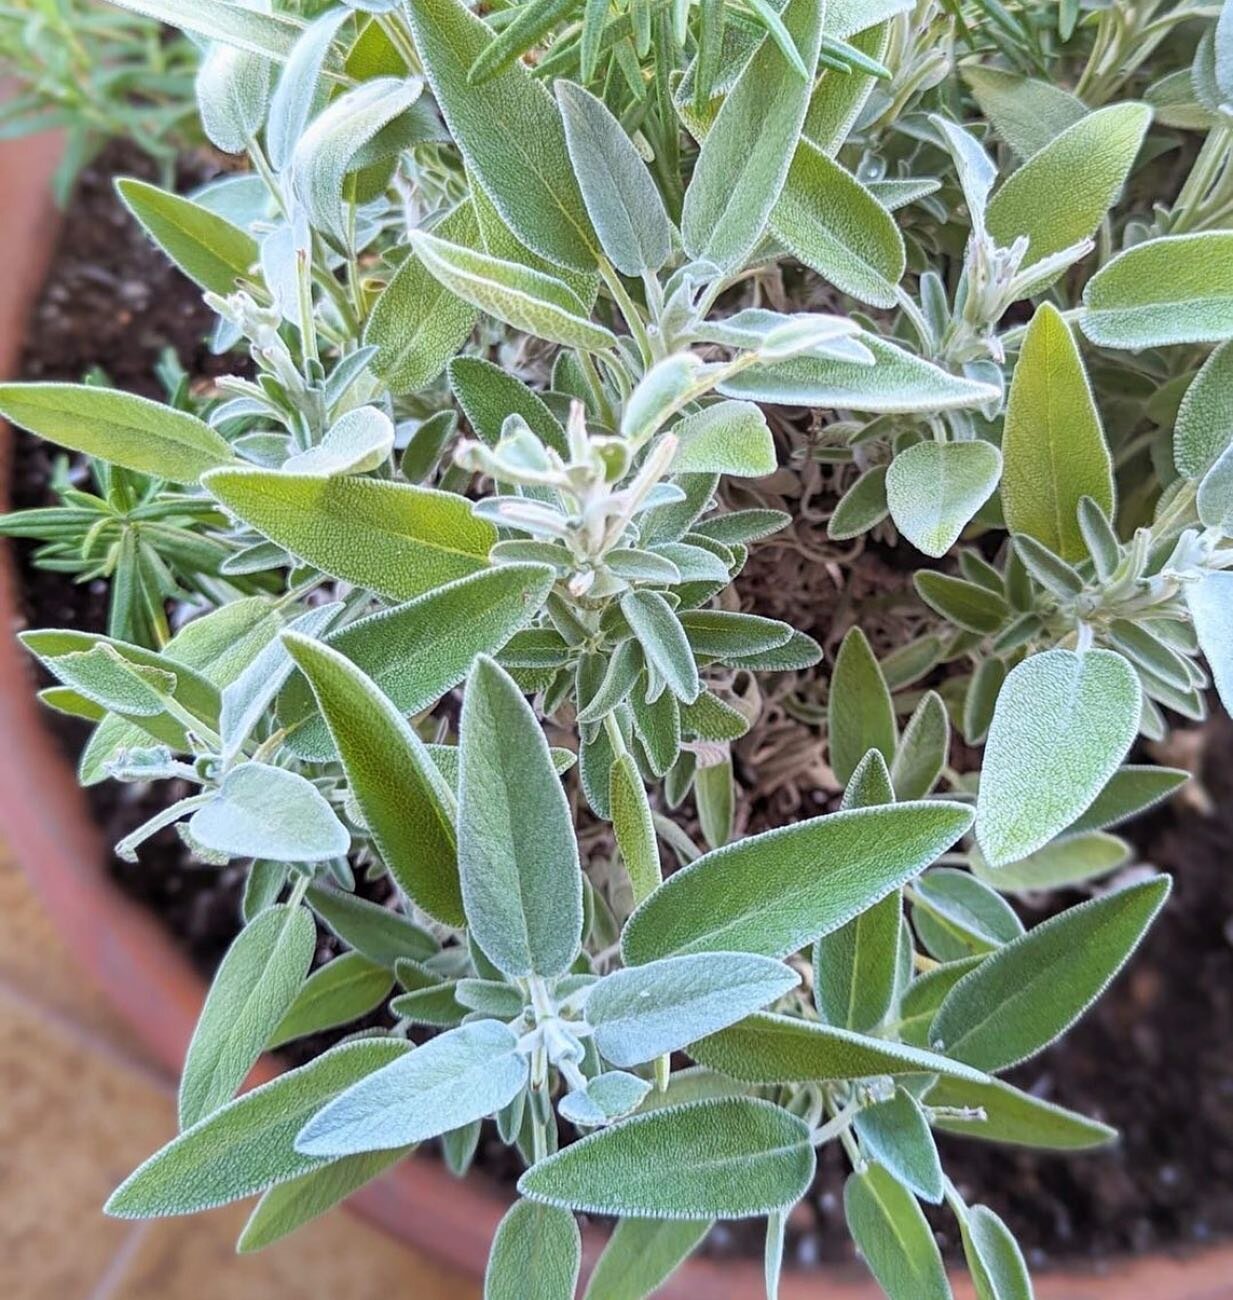 Sage in my garden! 

🙏🏻Sage is nutrient-dense, antibacterial, and anti-viral. It also has anti-cancer characteristics and is full of antioxidants which protect cellular health. 

🍃Sage may also help reduce #menopause symptoms. 

🍃Sage may help co